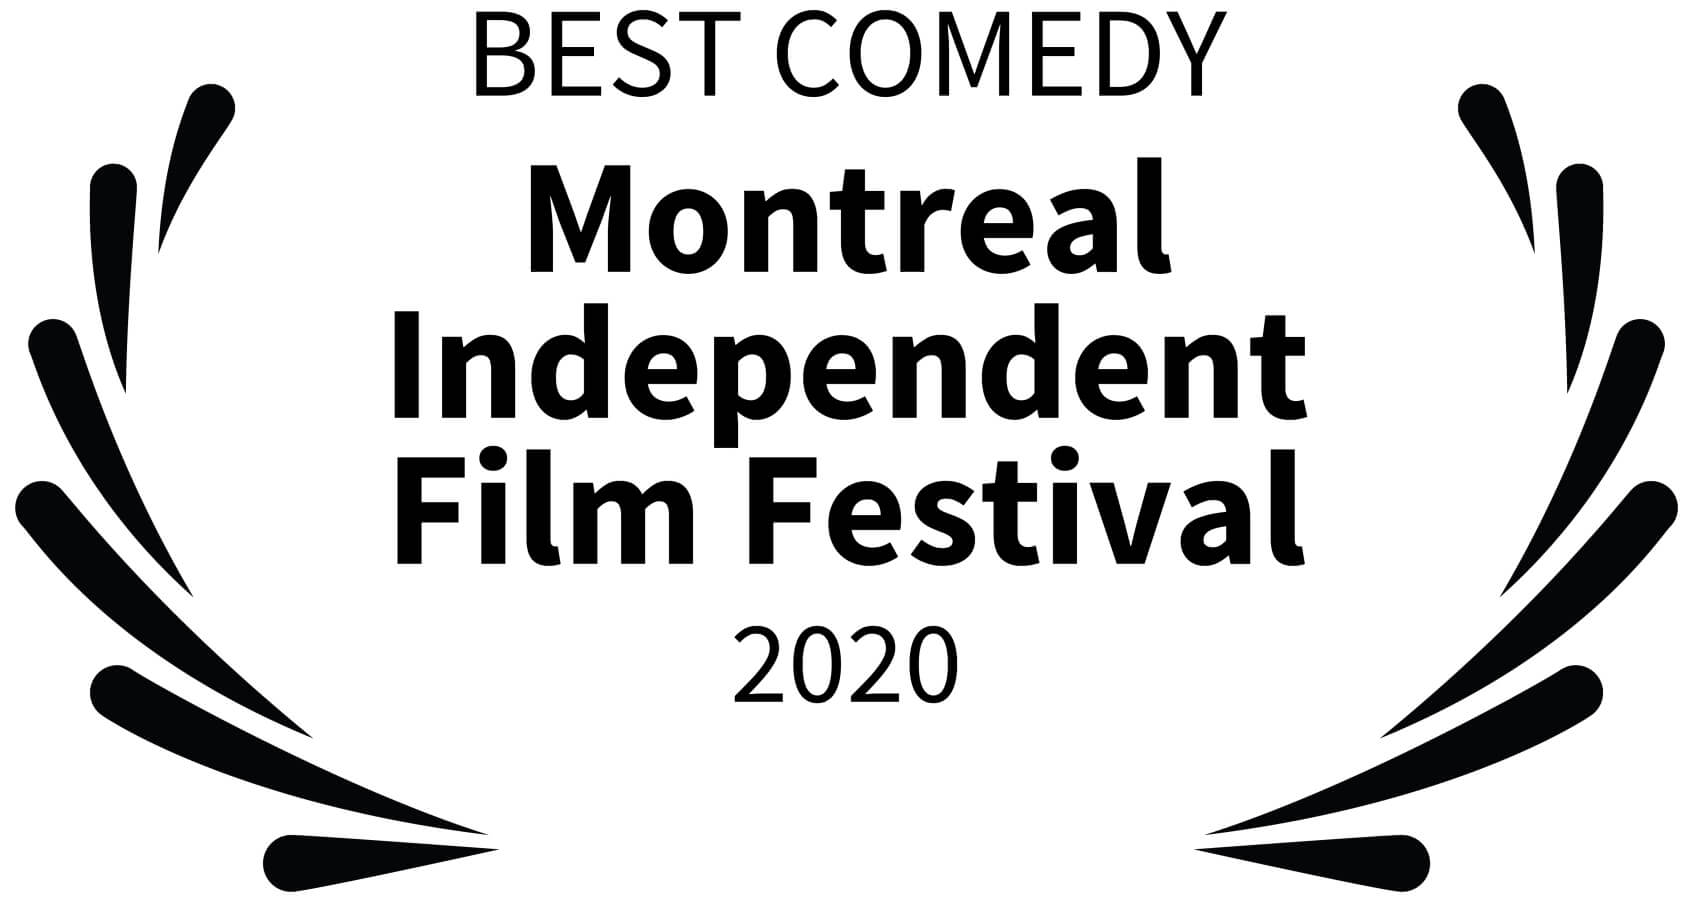 BEST COMEDY - Montreal Independent Film Festival 2020